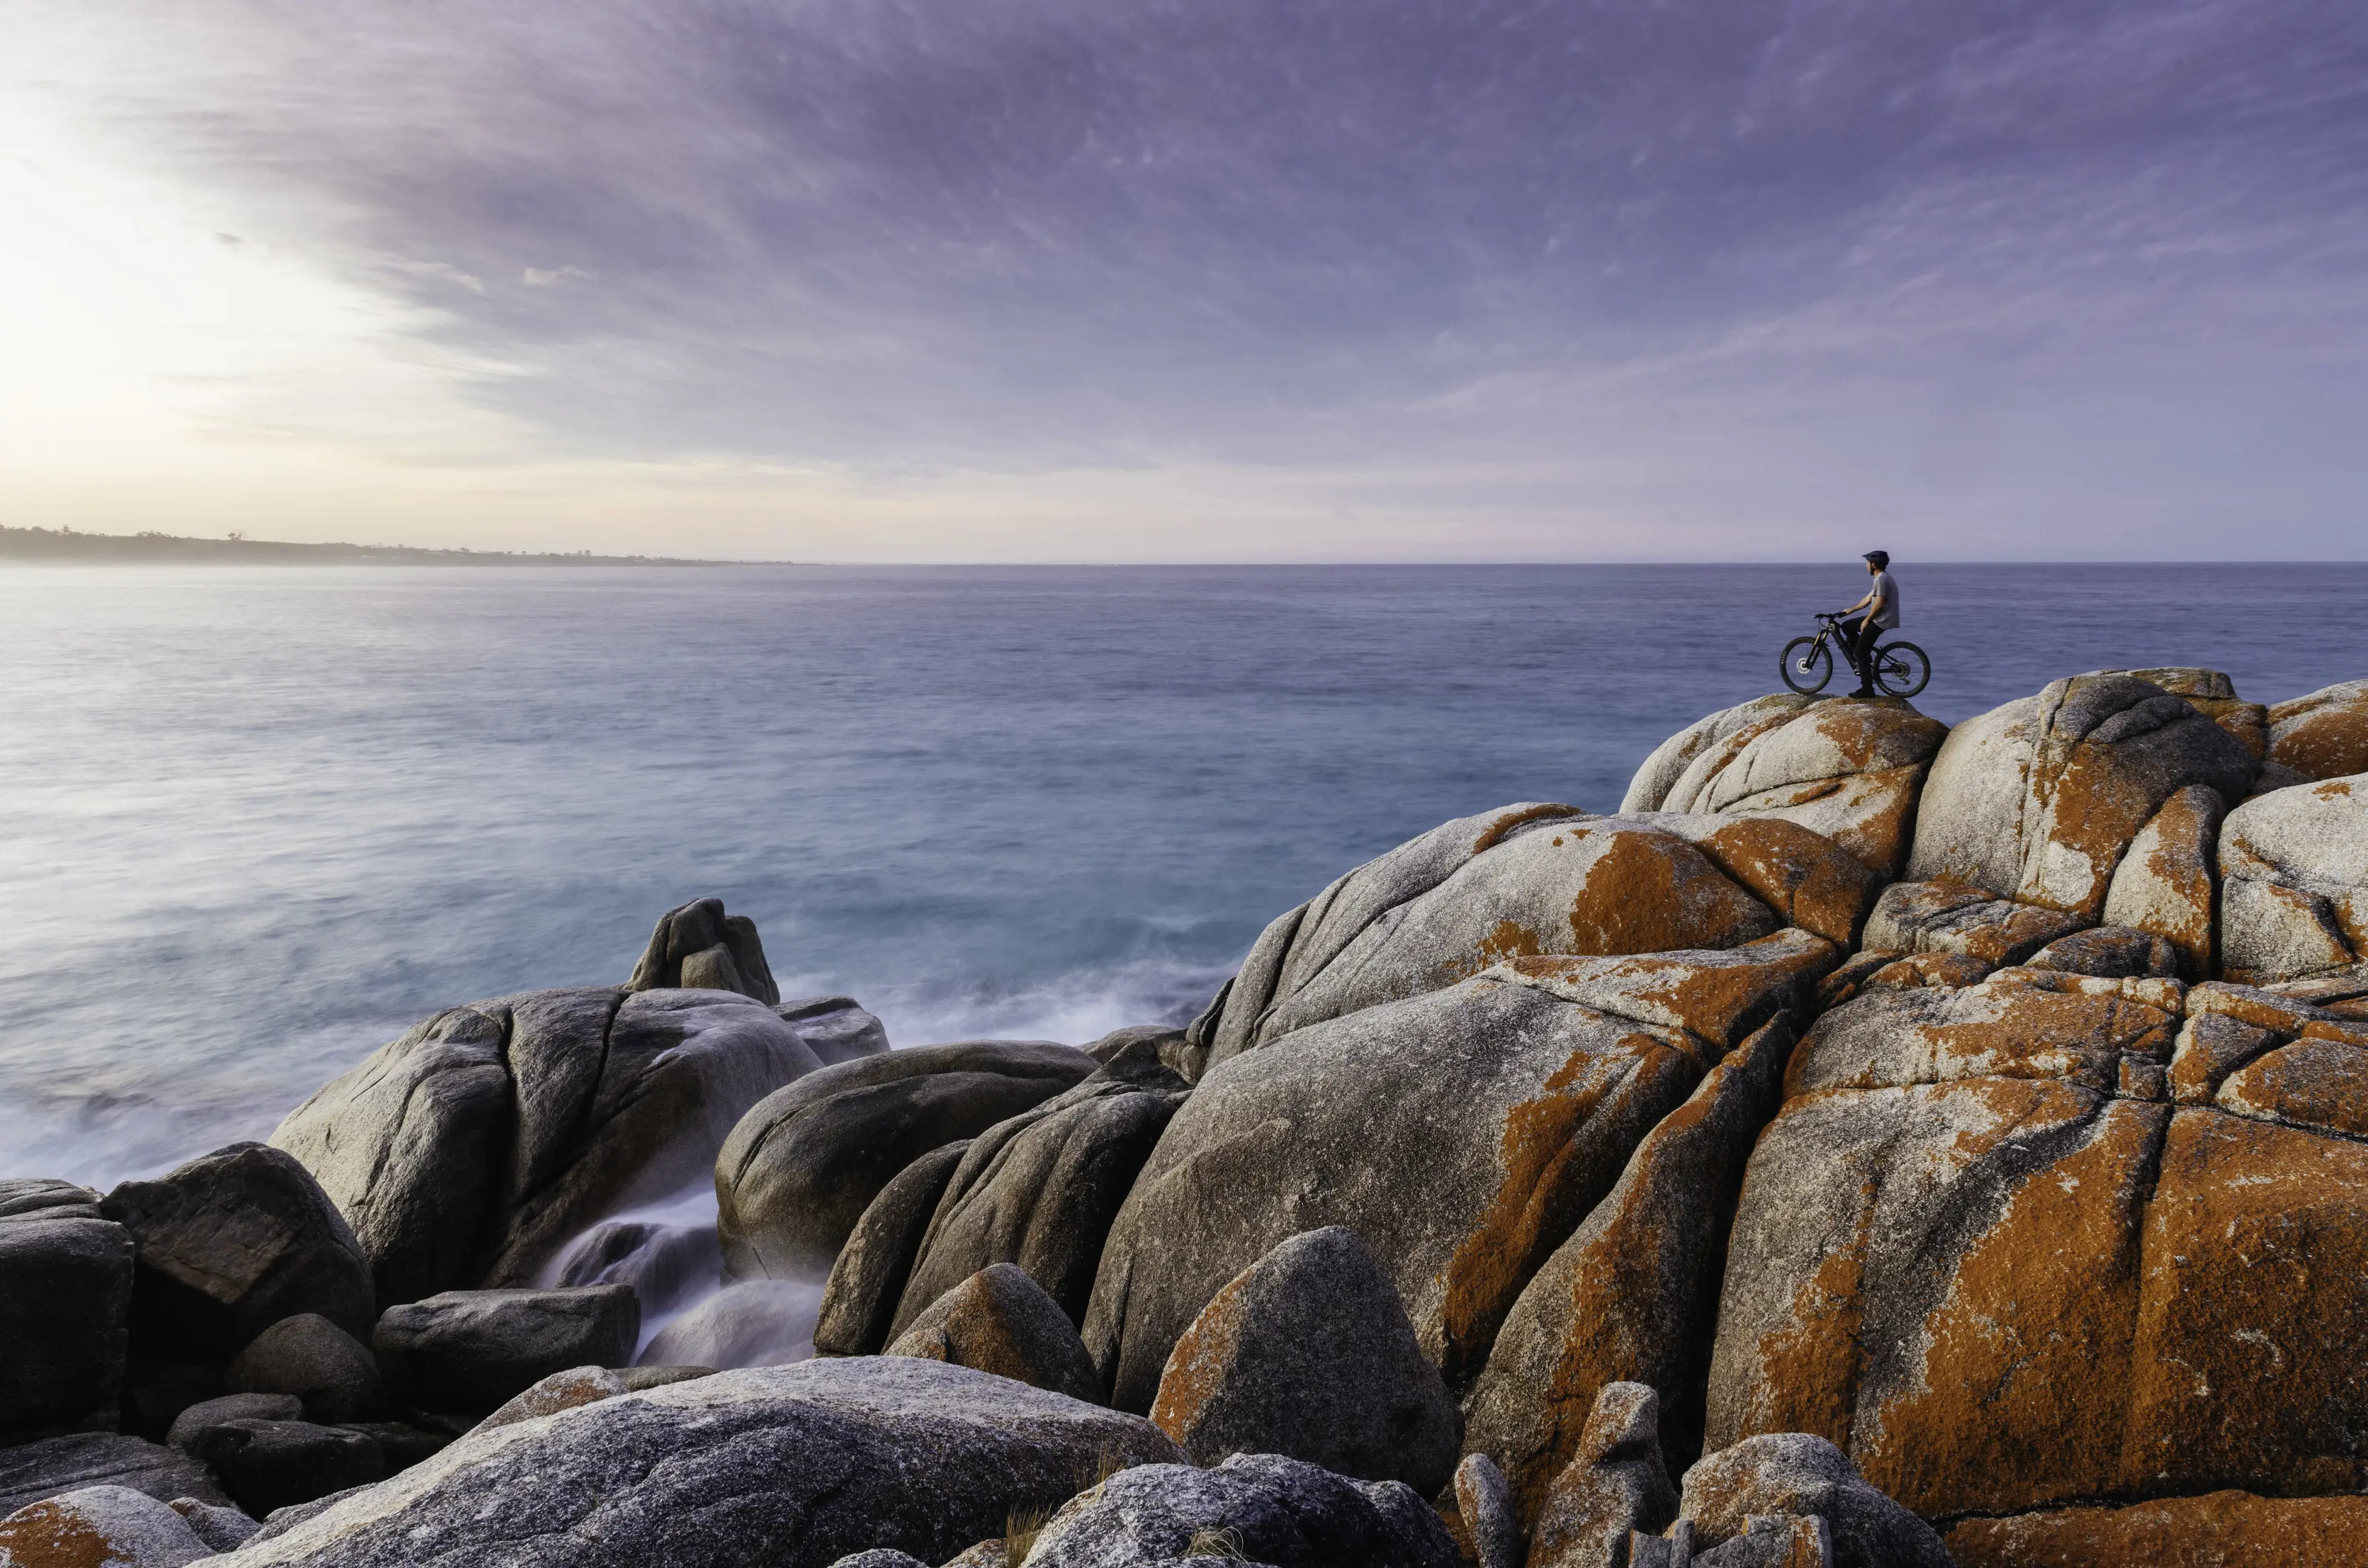 A cyclist parks up on the orange coloured rocks looking out at the view at Bay of Fires.